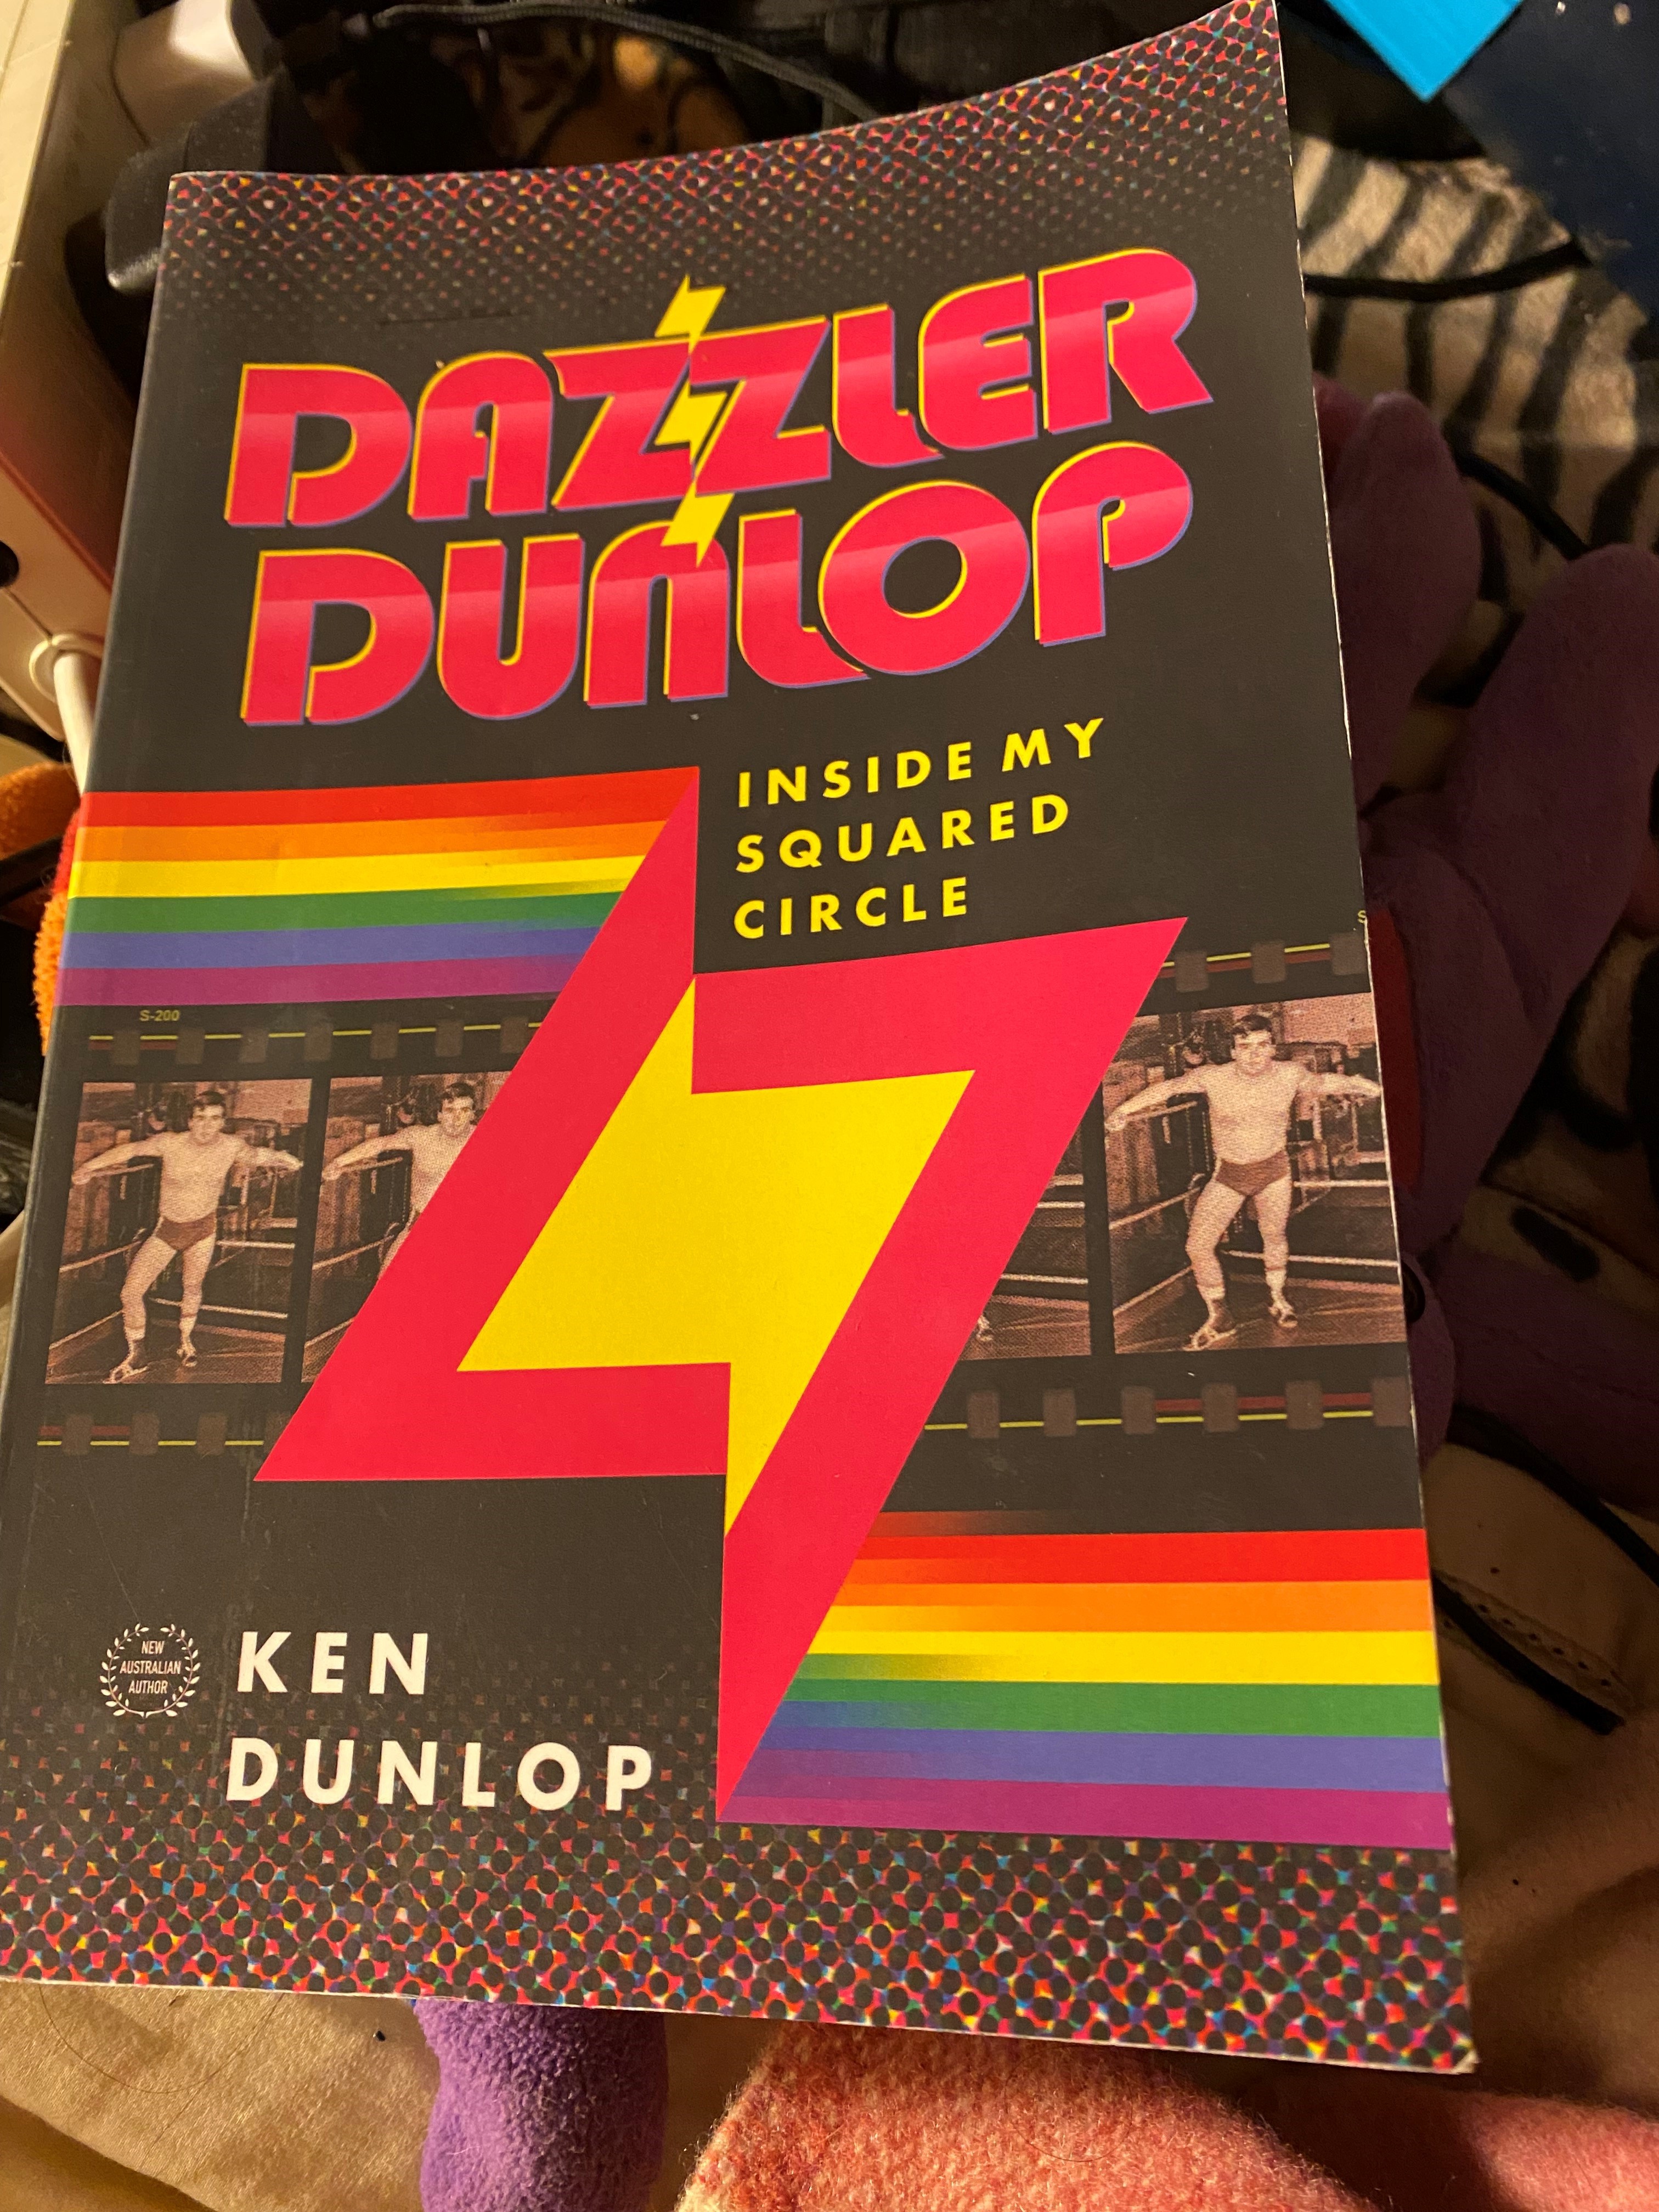 Cover of Book by Ken Dazzler Dunlop Inside my Squared Circle